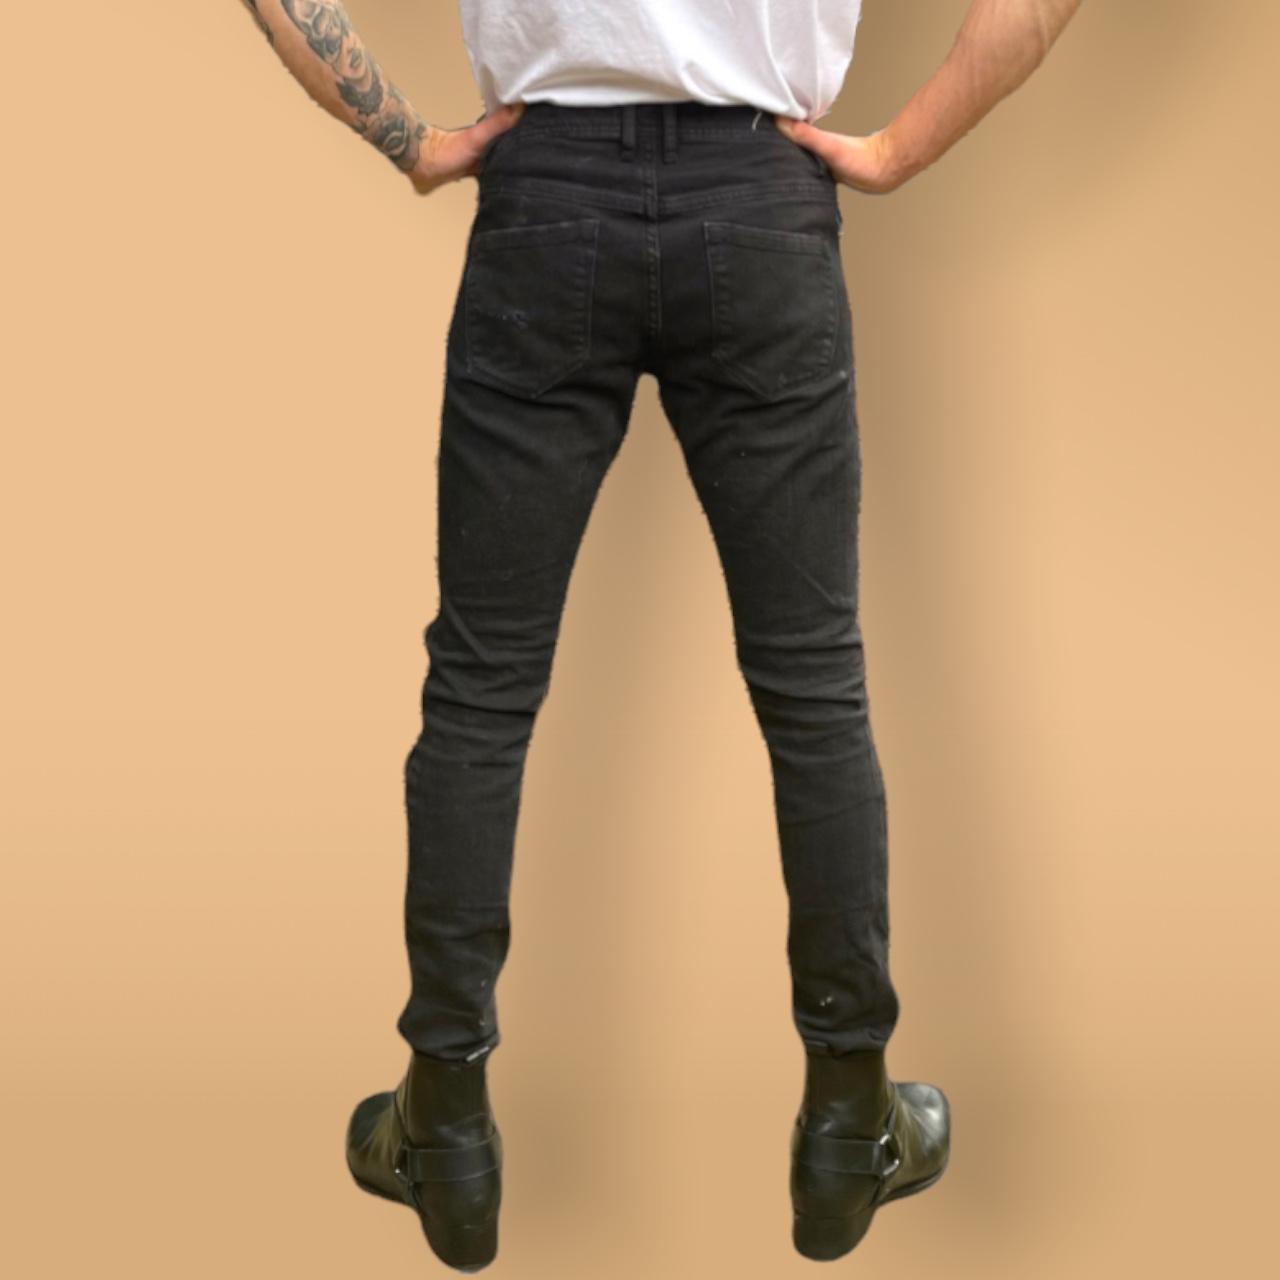 Product Image 2 - Mens Ripped Skinny Jeans
 